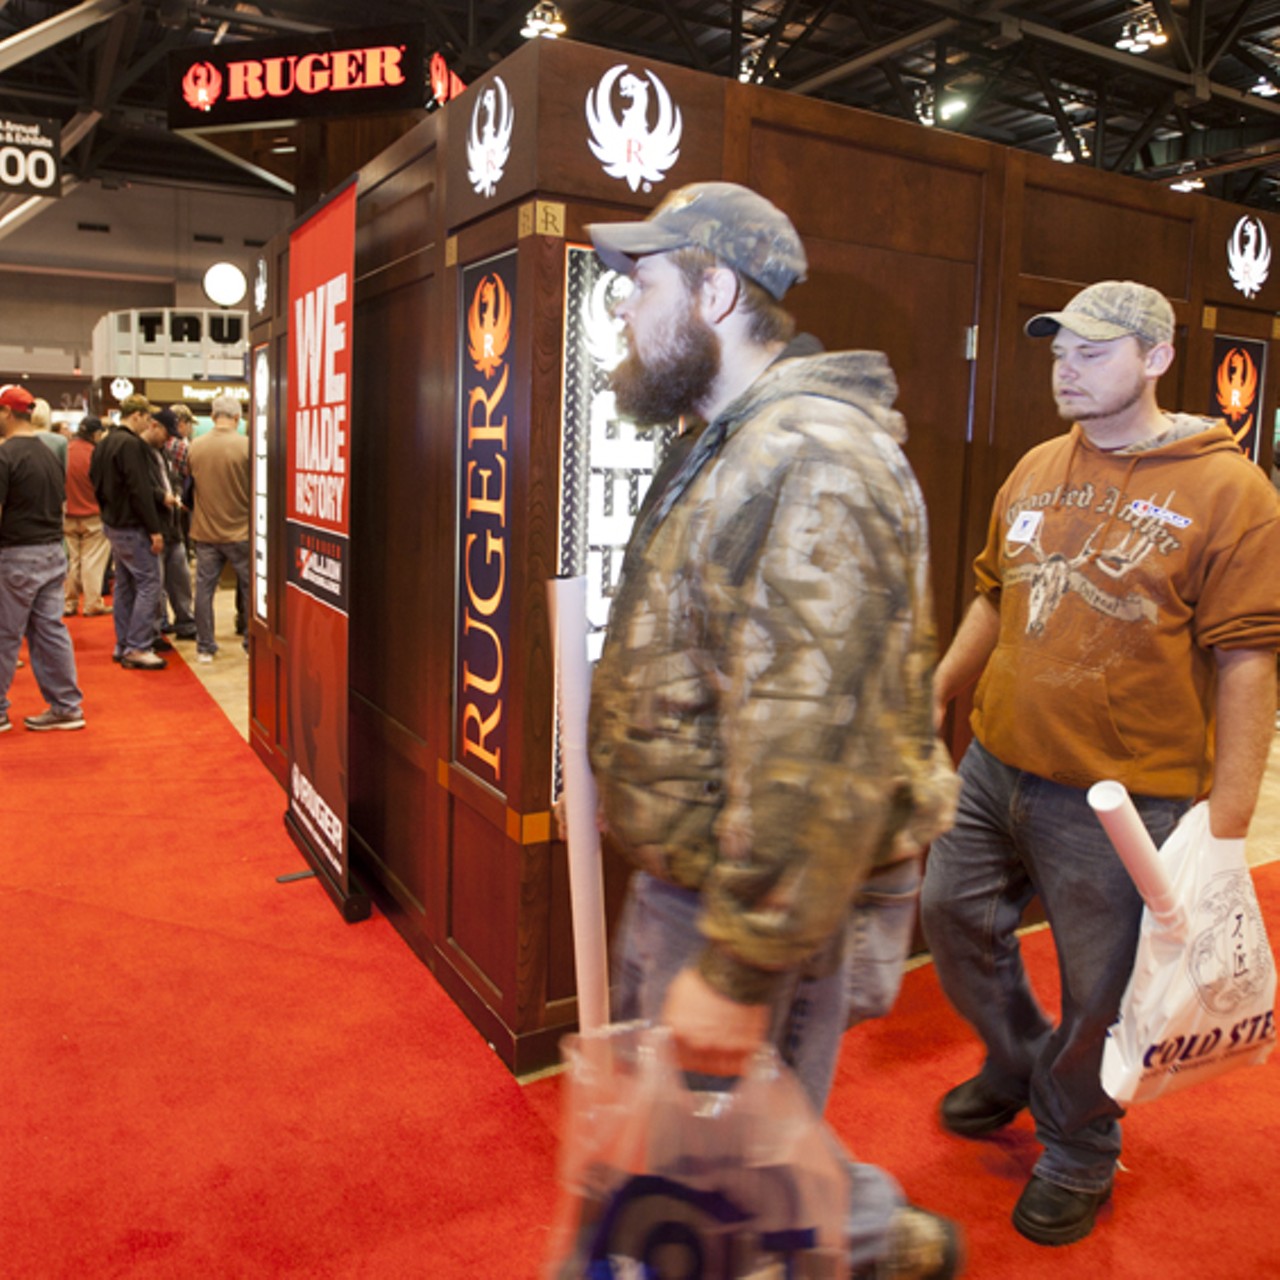 Scenes from the NRA convention in St. Louis